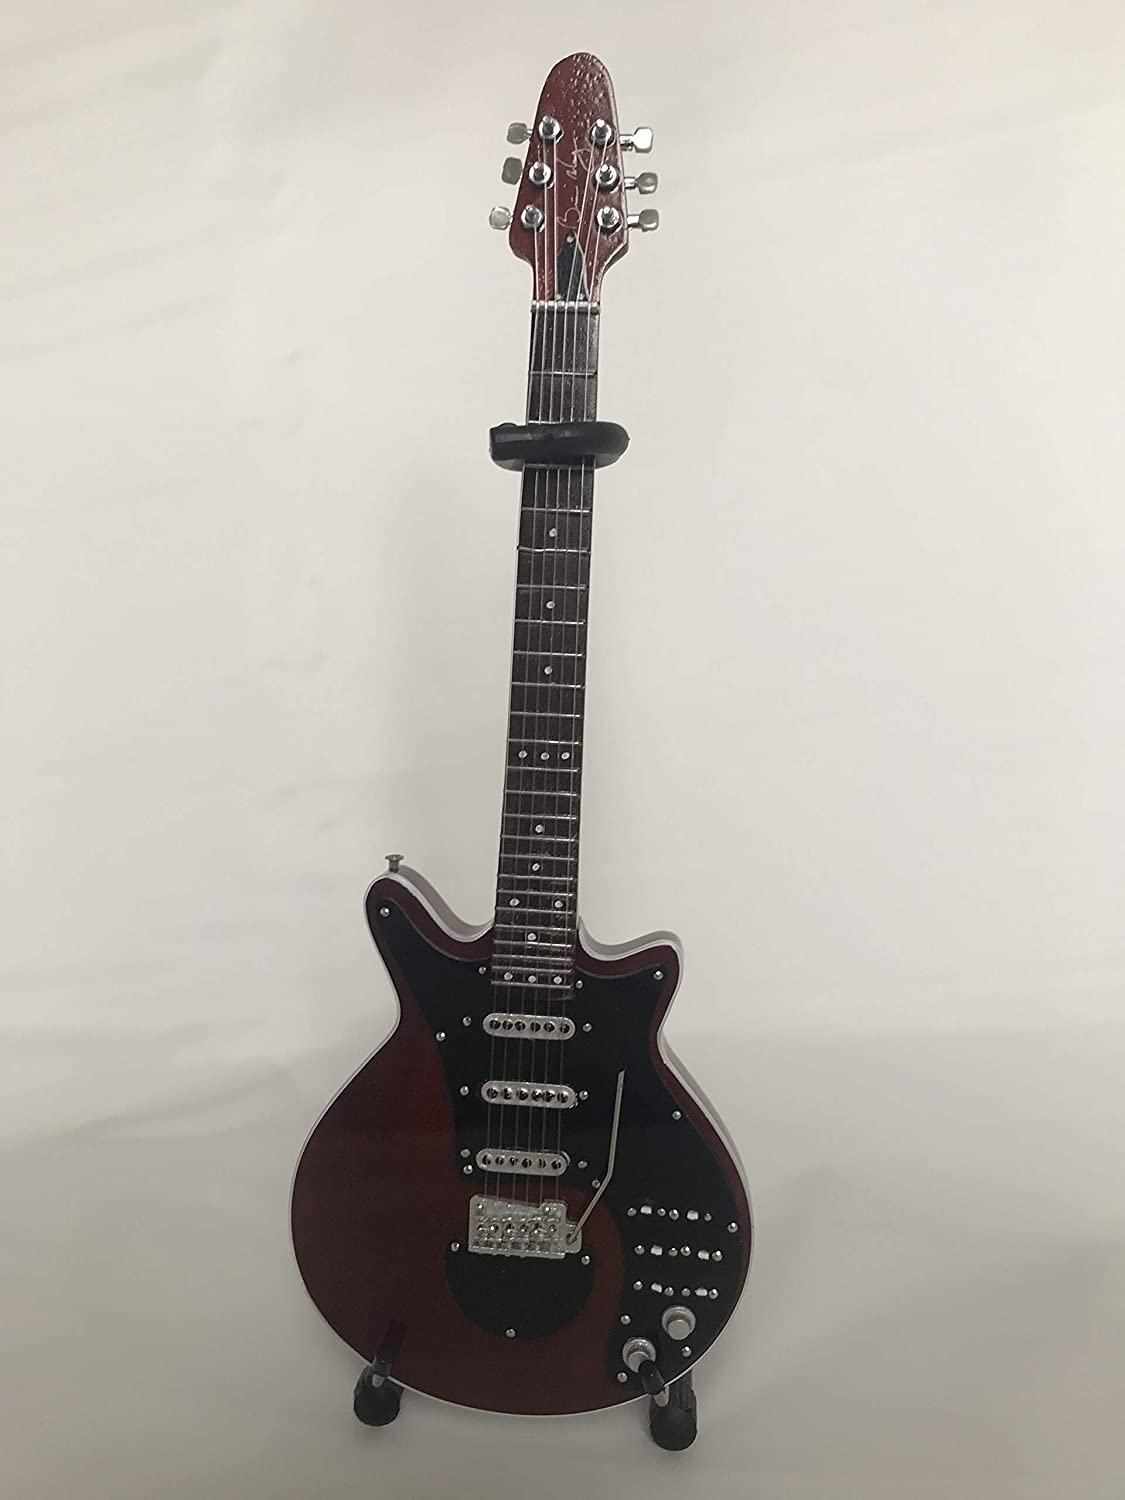 QUEEN - BRIAN MAY - SIGNATURE RED SPECIAL MINI GUITAR